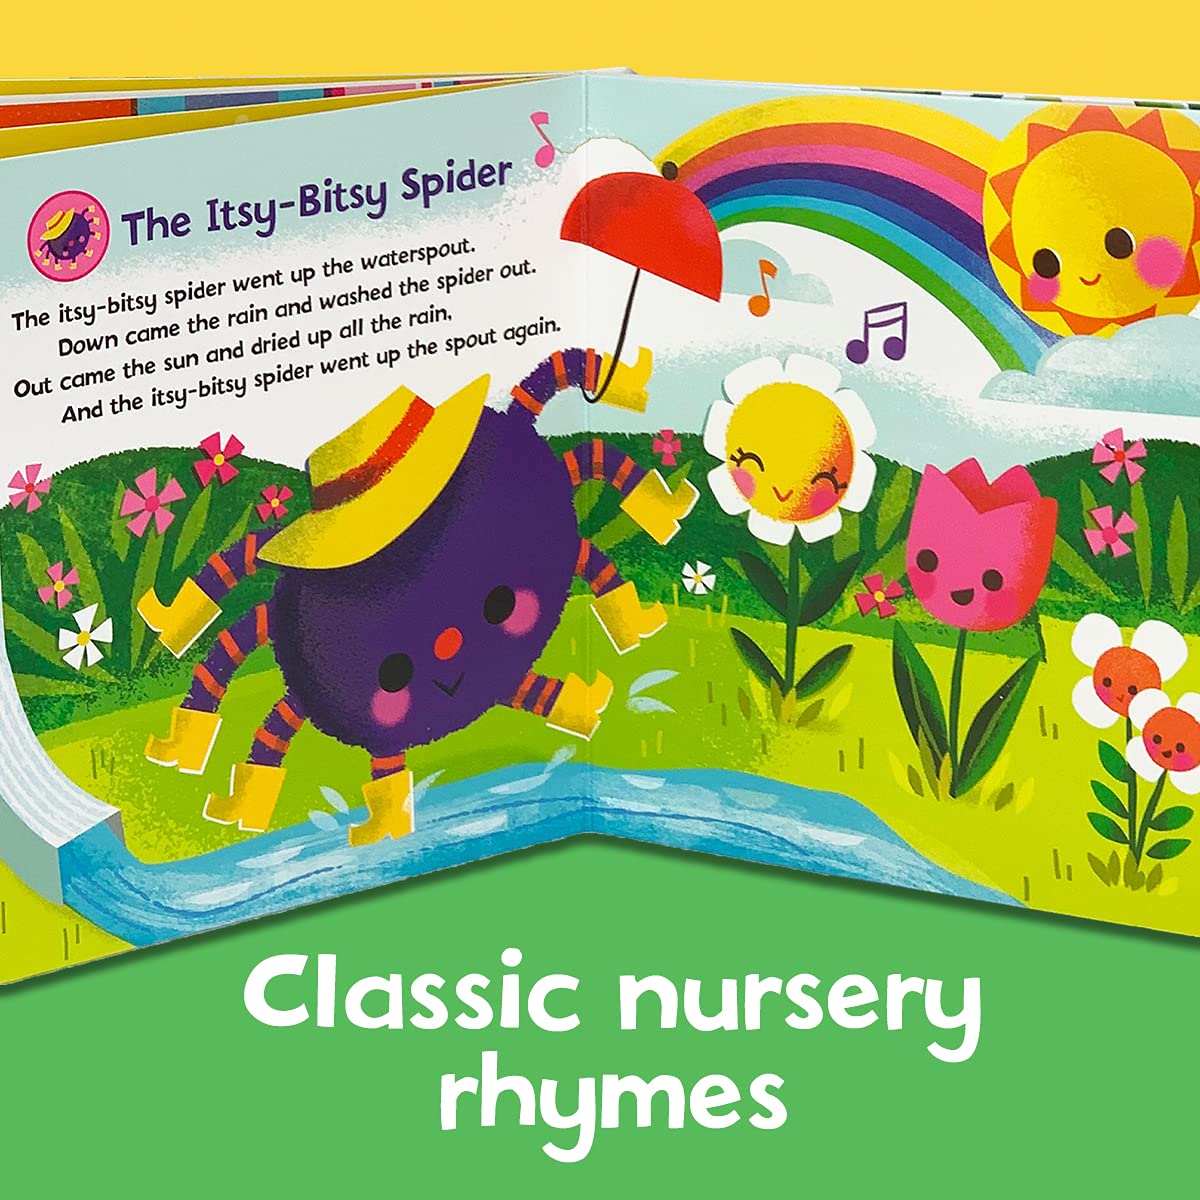 Baby's First Playtime Songs: Interactive Children's Sound Book for Babies and Toddlers Ages 1-3 with Favorite Sing-Along Tunes (Interactive Children's Song Book with 6 Sing-Along Tunes)